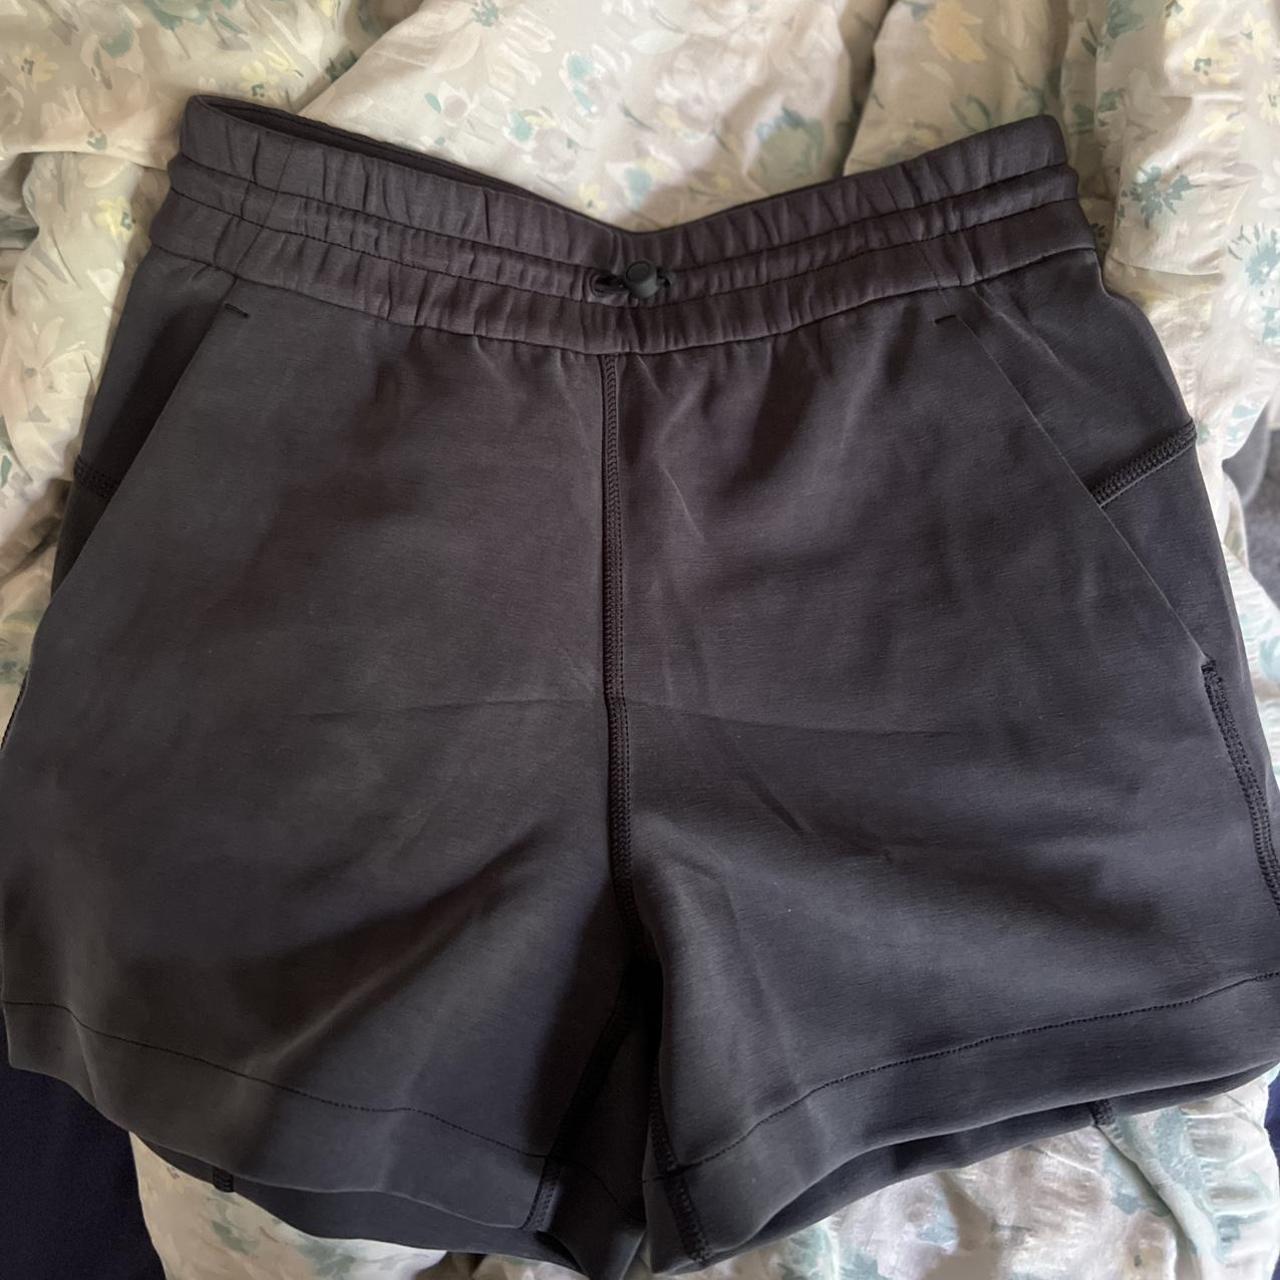 brand new lululemon shorts , size 2, tags are still on